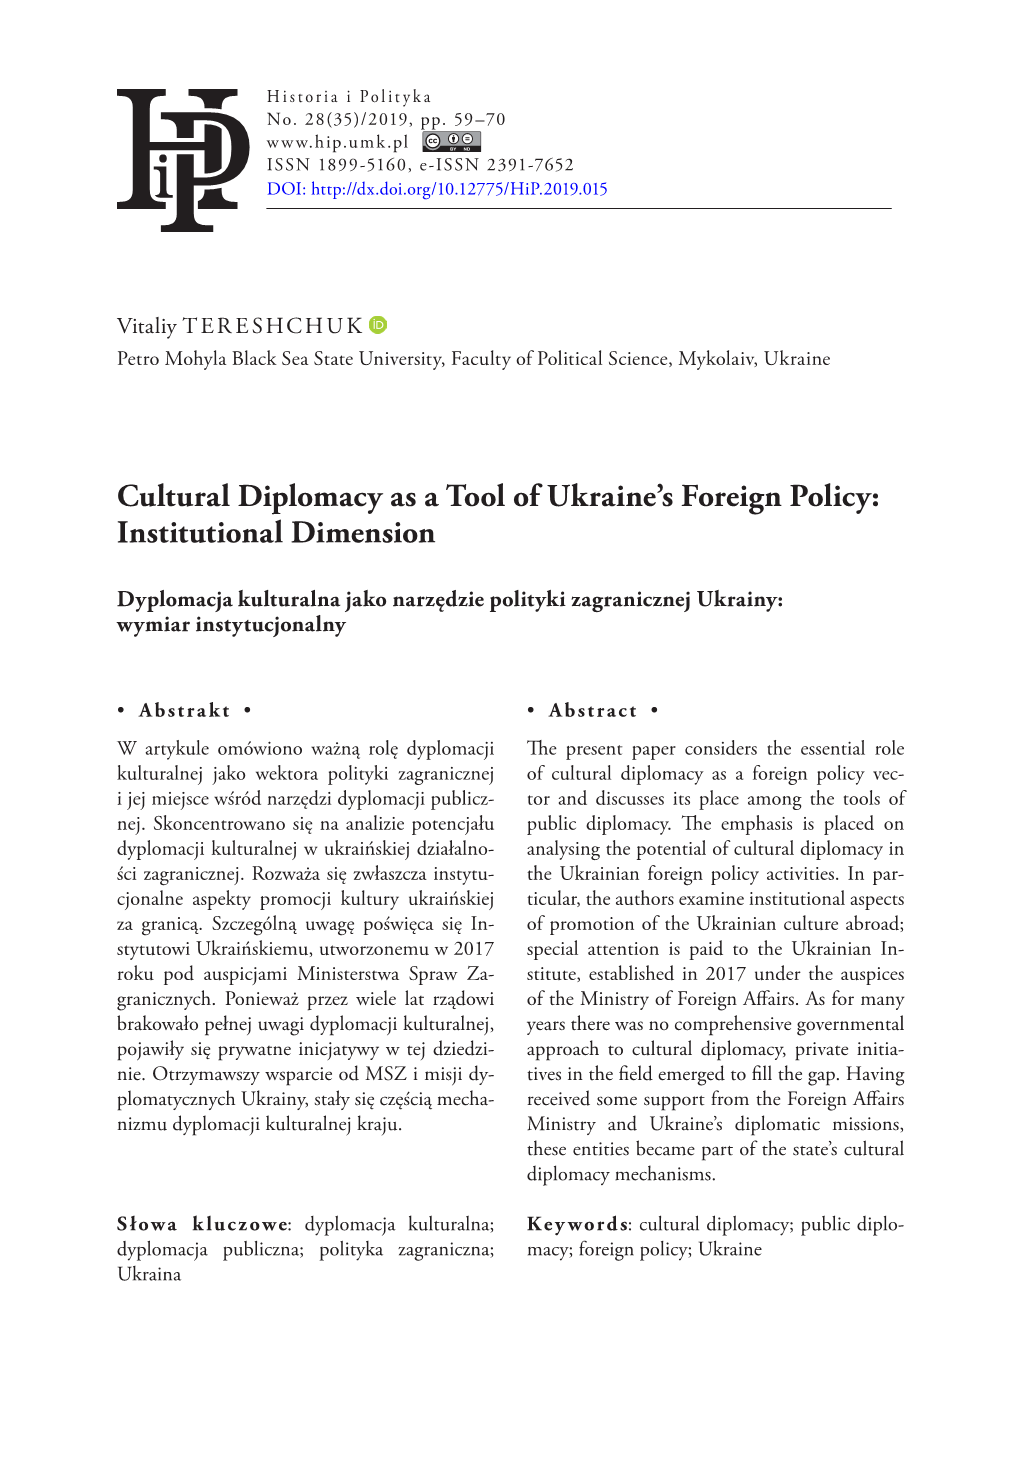 Cultural Diplomacy As a Tool of Ukraine's Foreign Policy